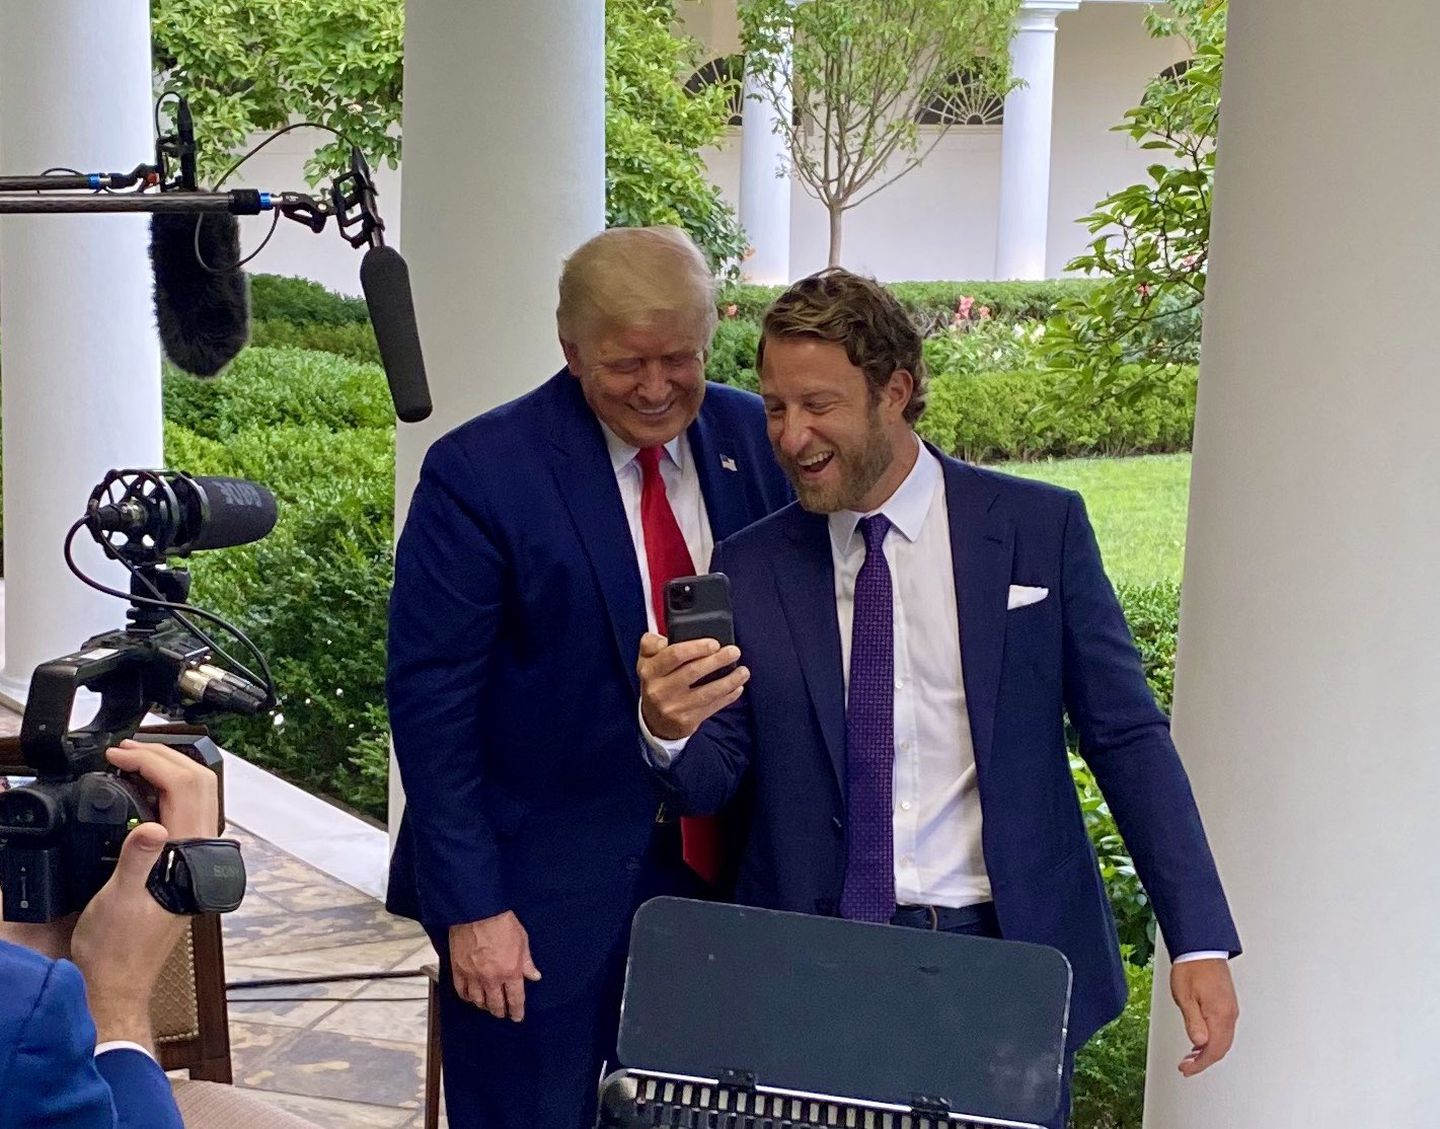 Dave Portnoy shows his phone to President Donald Trump